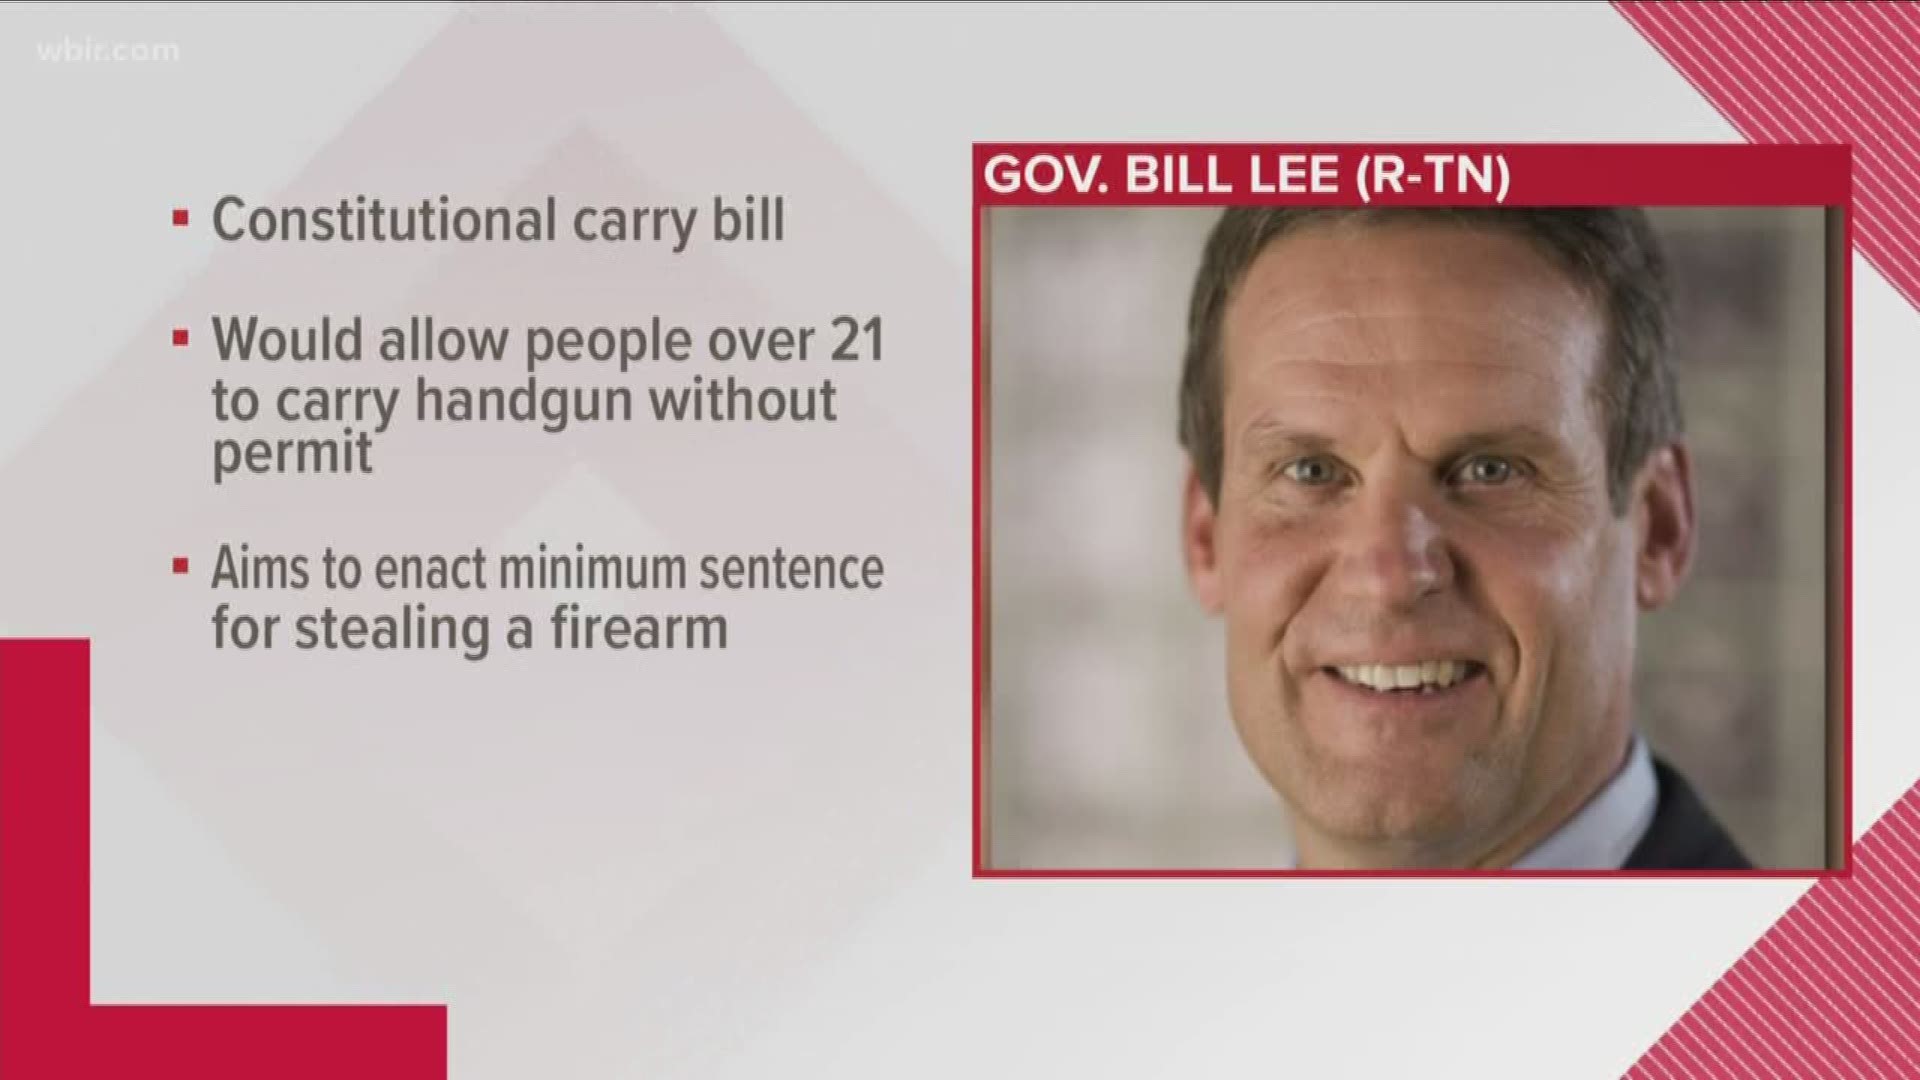 The bill would allow people over the age of 21 to carry a handgun with or without a permit.  There would be some restricted areas where guns would not be allowed.